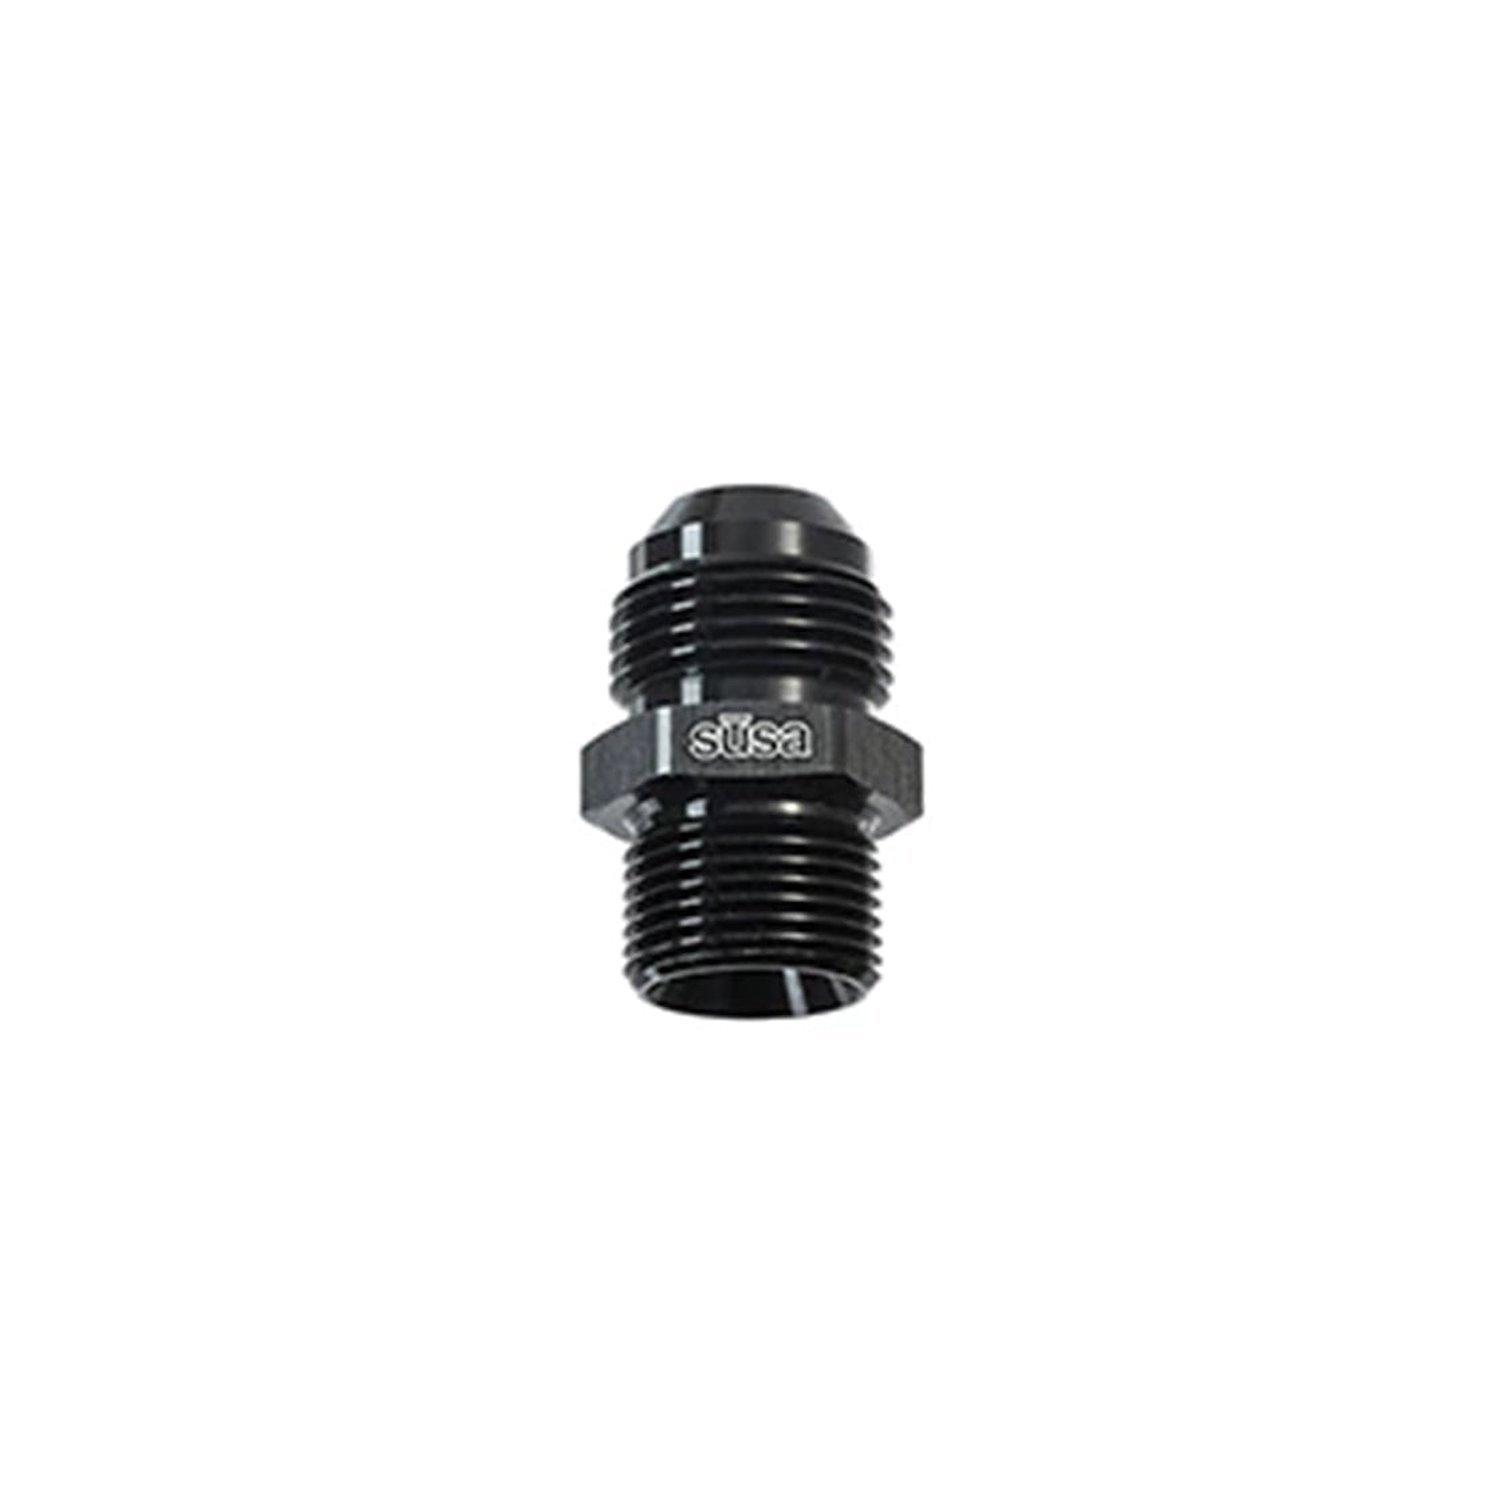 22-M16AN06-00 Adapter Fitting, M16 Male to AN06 Male, Straight